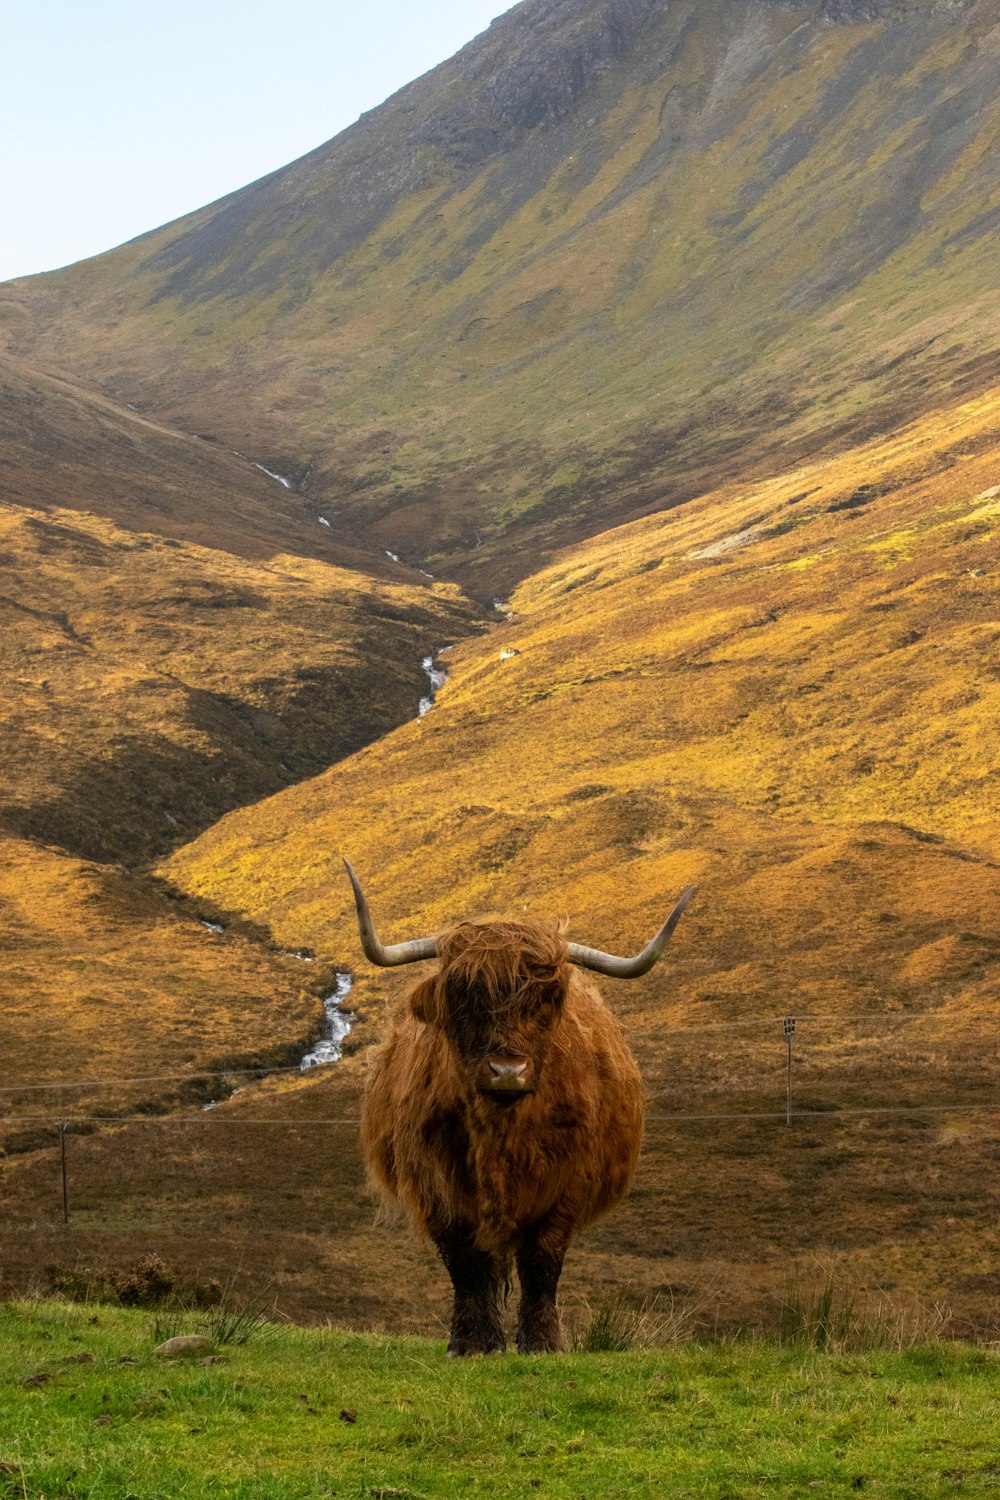 a bull standing in a field with a mountain in the background